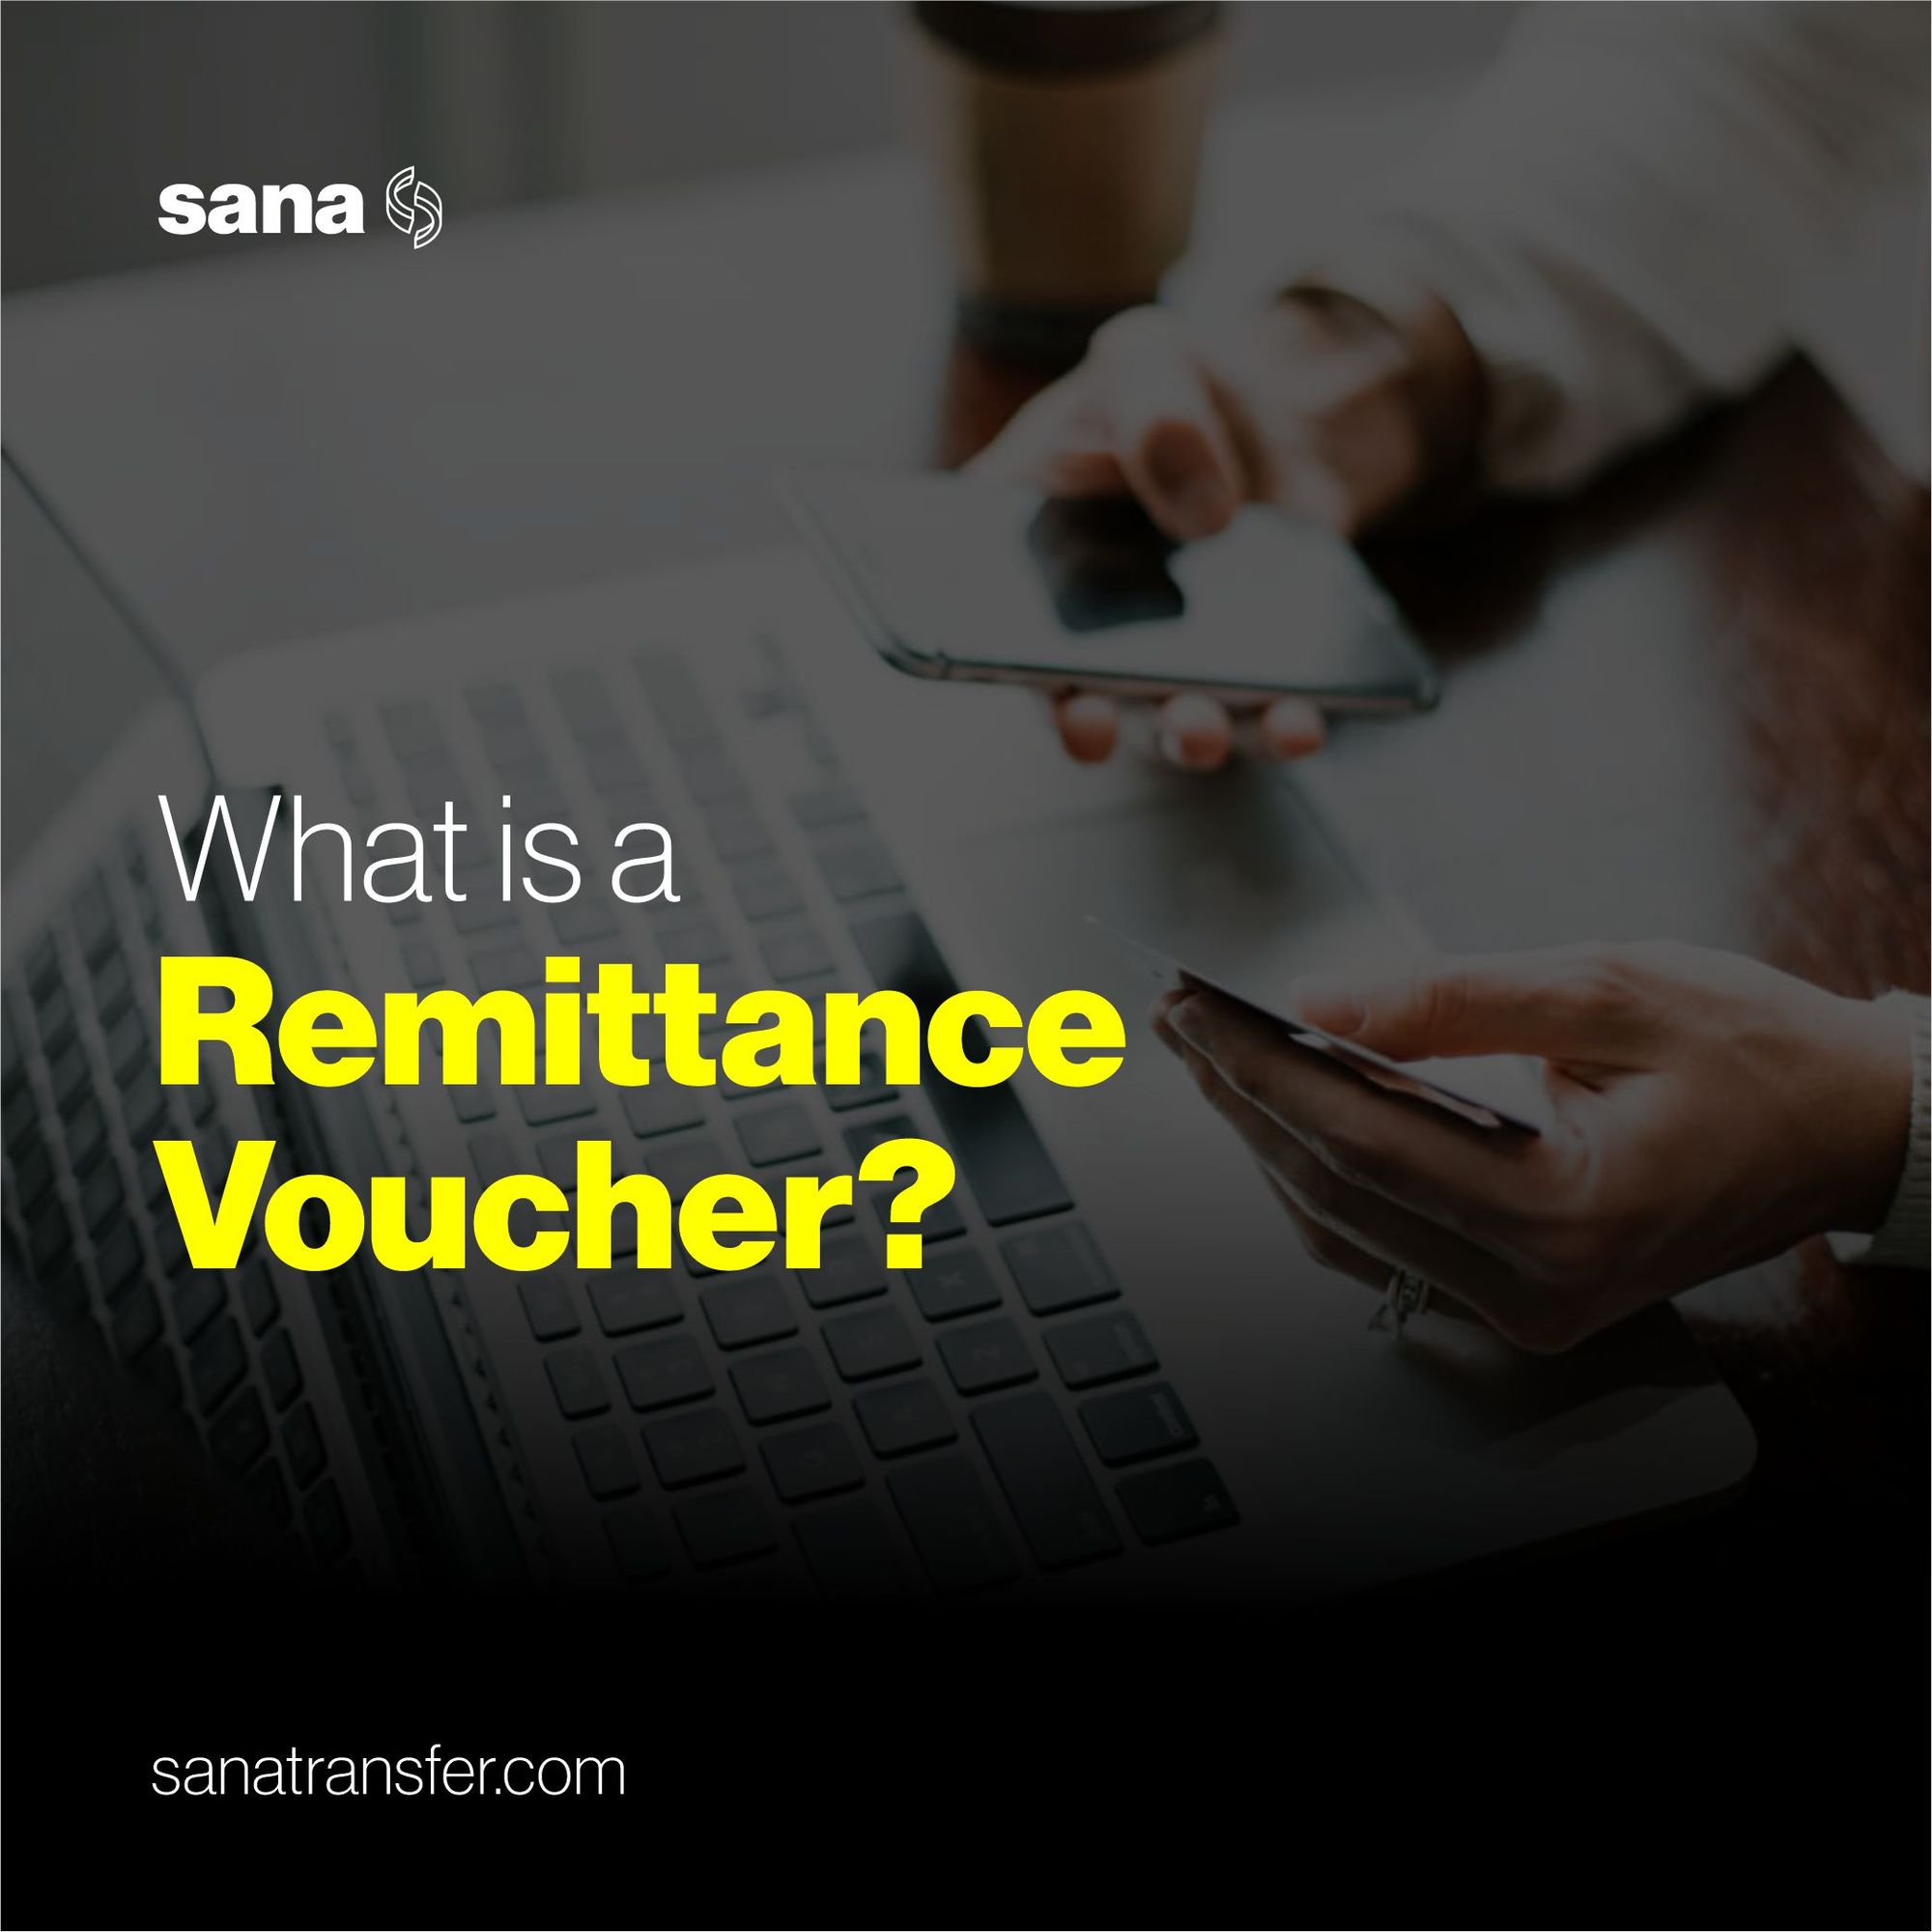 What is a Remittance Voucher?